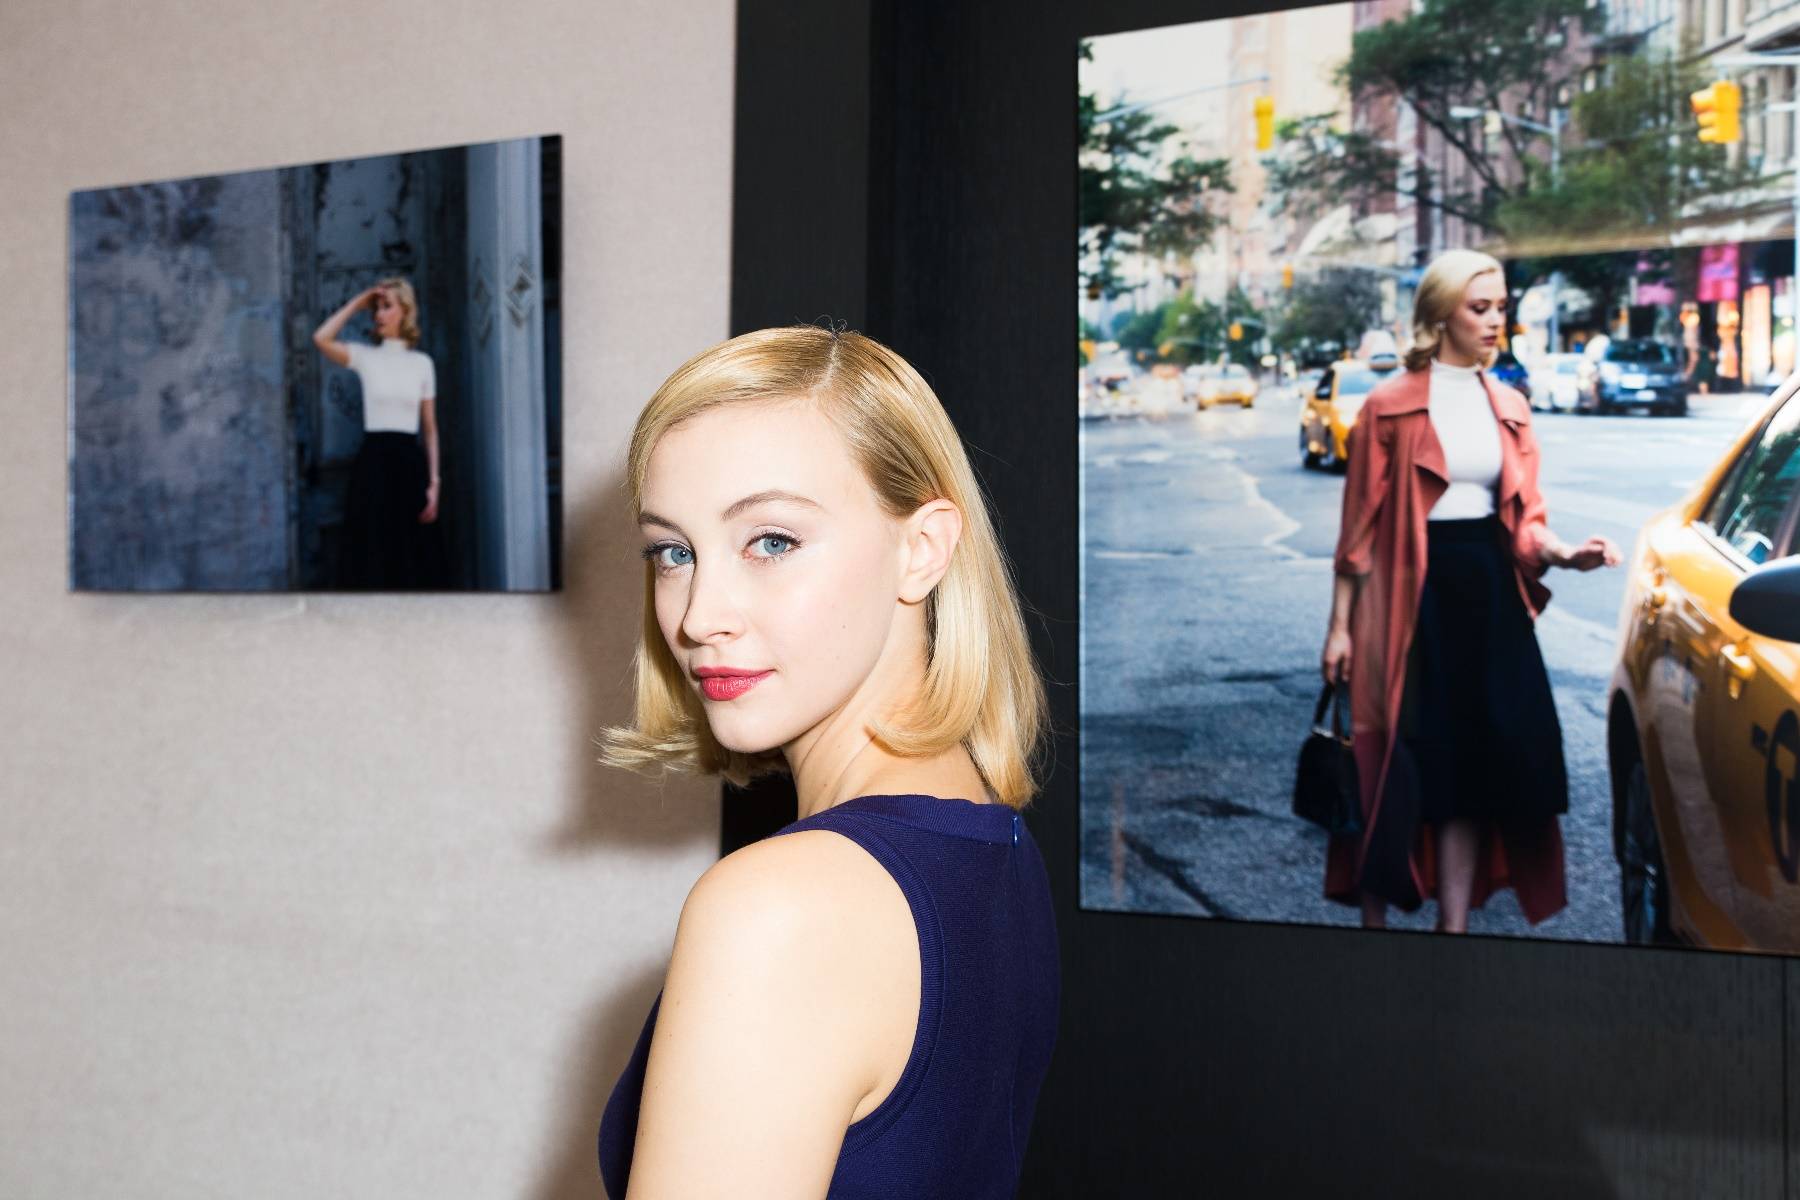 Jaeger-LeCoultre Showcases “Two Worlds” Photo Exhibit With Sarah Gadon At New York Flagship Boutique